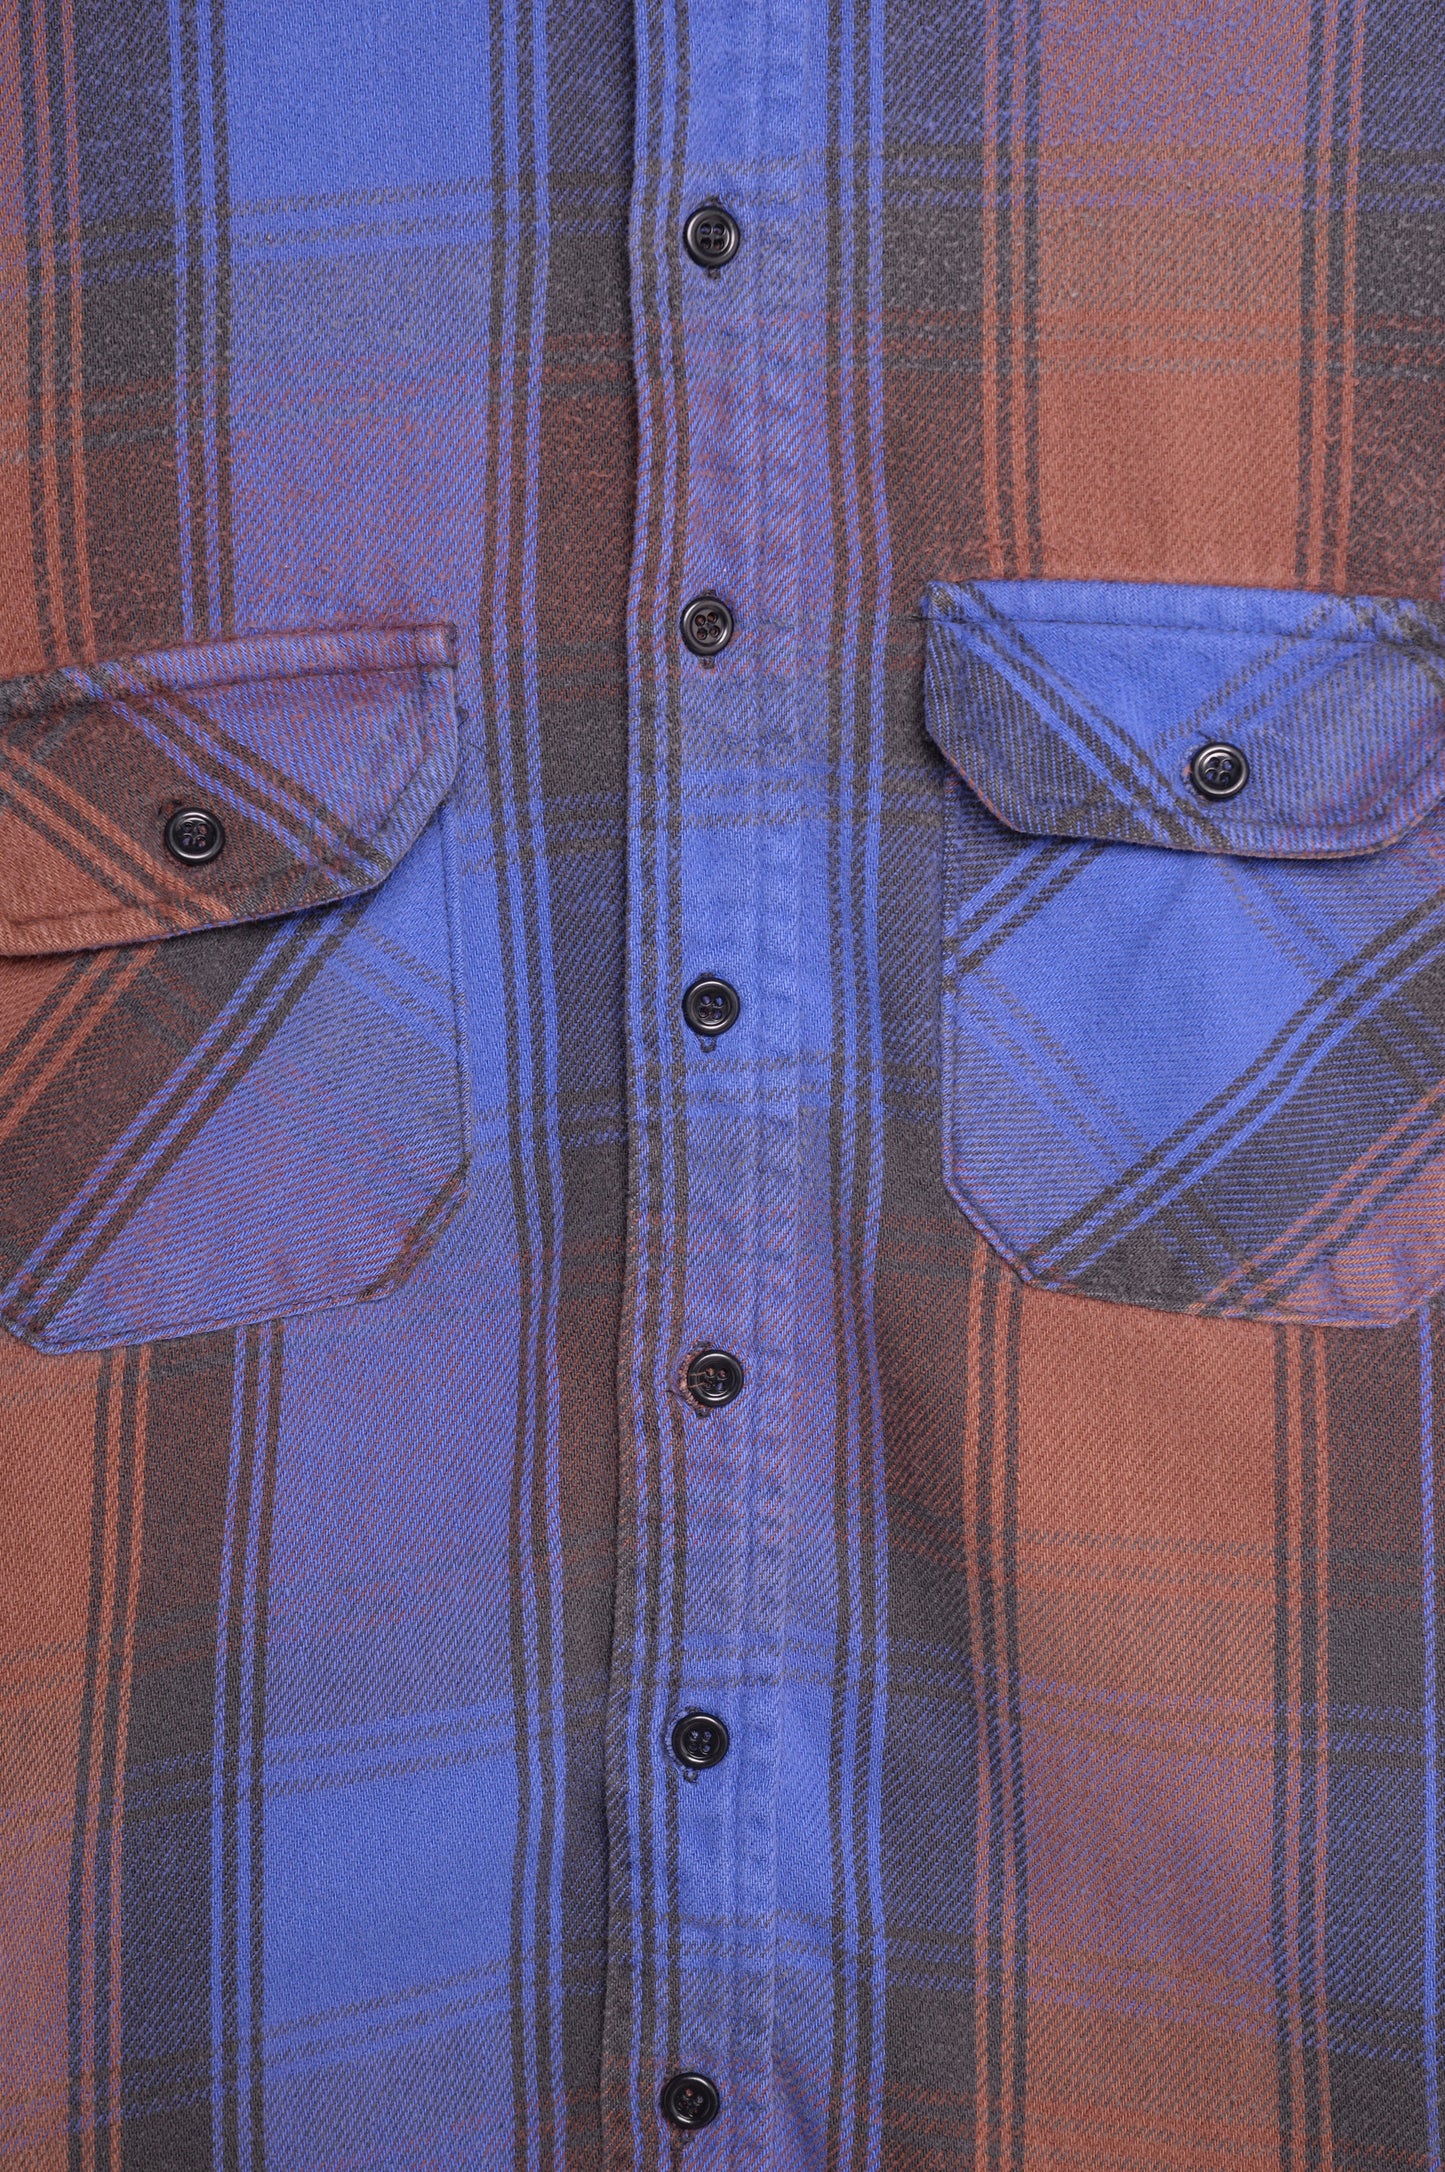 1990s Faded Flannel Shirt USA